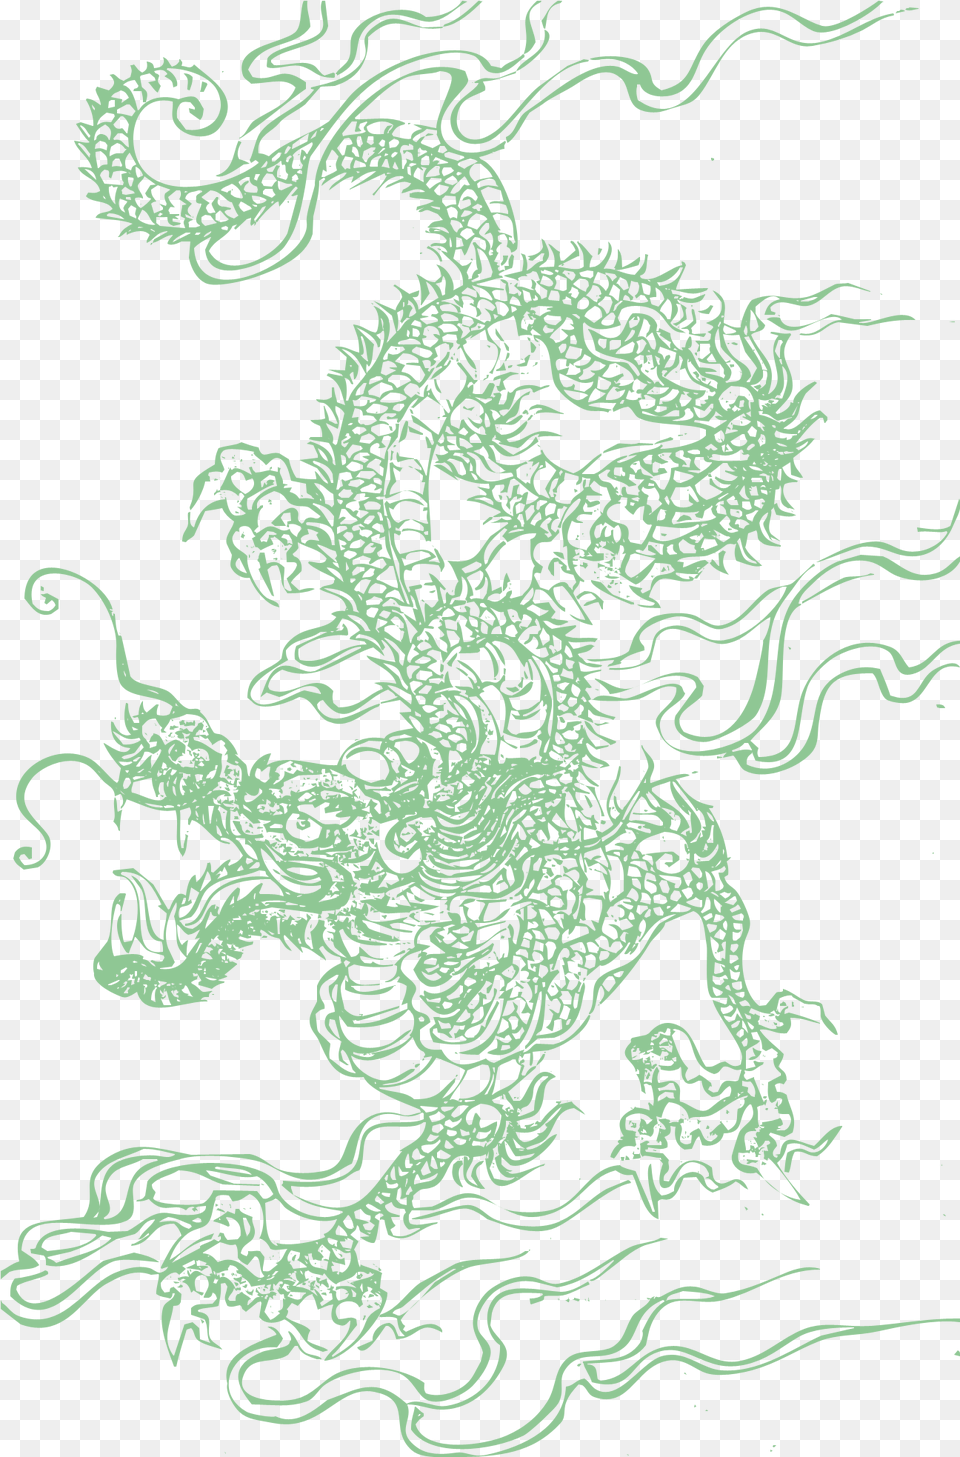 Dragon Transparent Pictures Icons And Backgrounds Story Of The Chinese Dragon, Pattern, Art Png Image